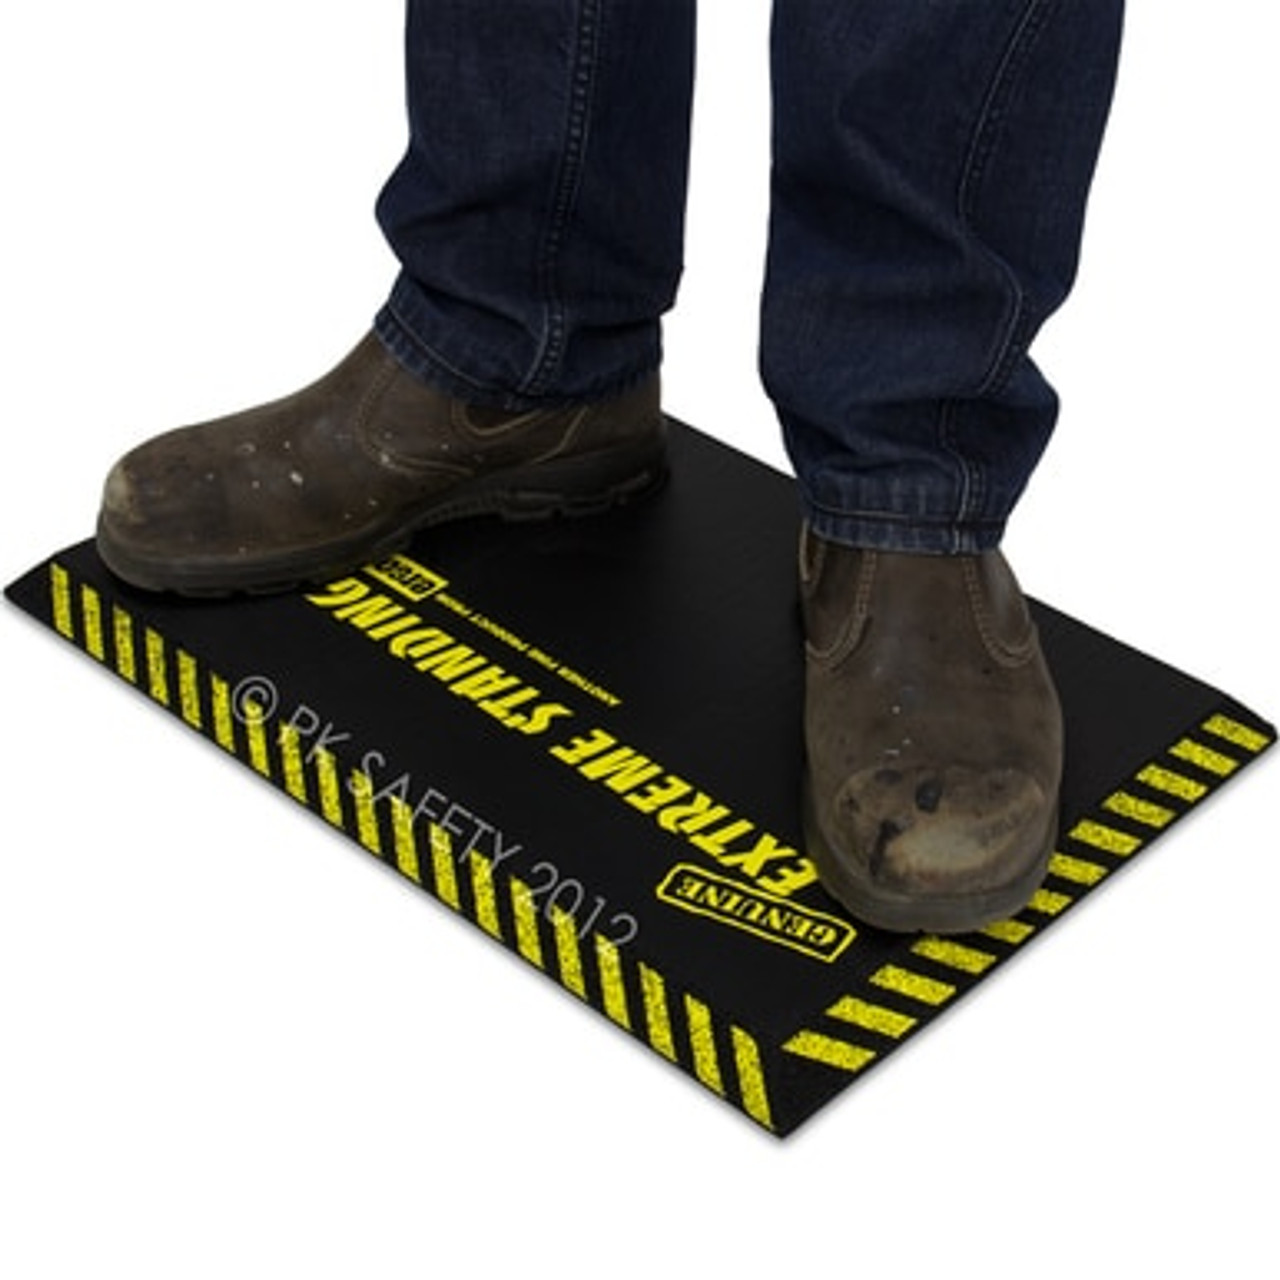 Extreme Standing Mats — Working Concepts, Inc.